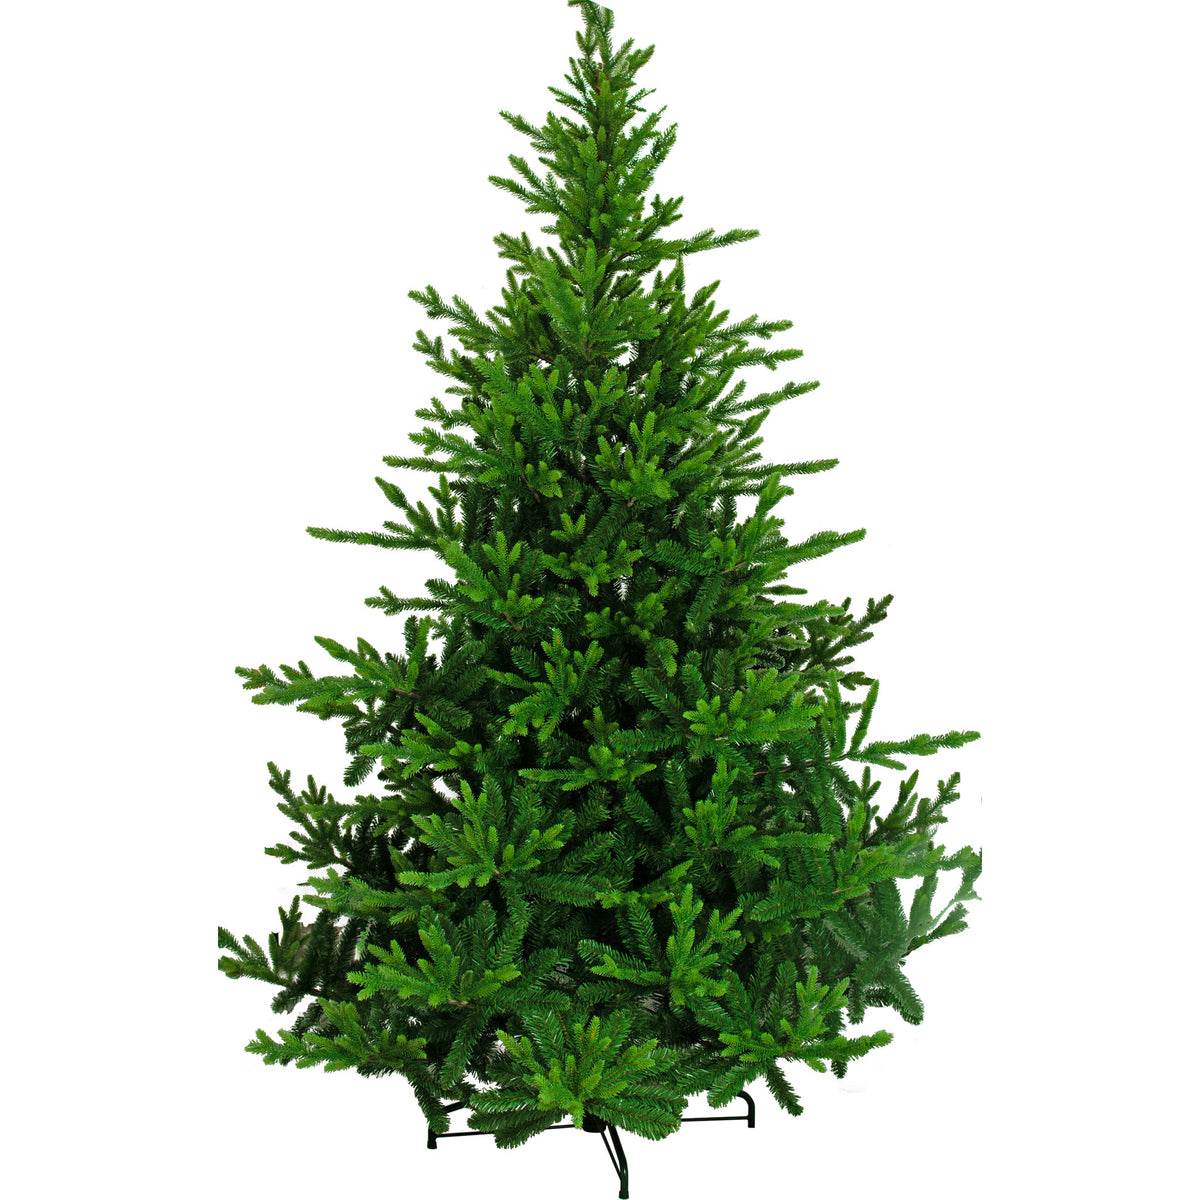 Introducing the 7 Foot Tall Noble Tree from our Luxe Christmas Collection!